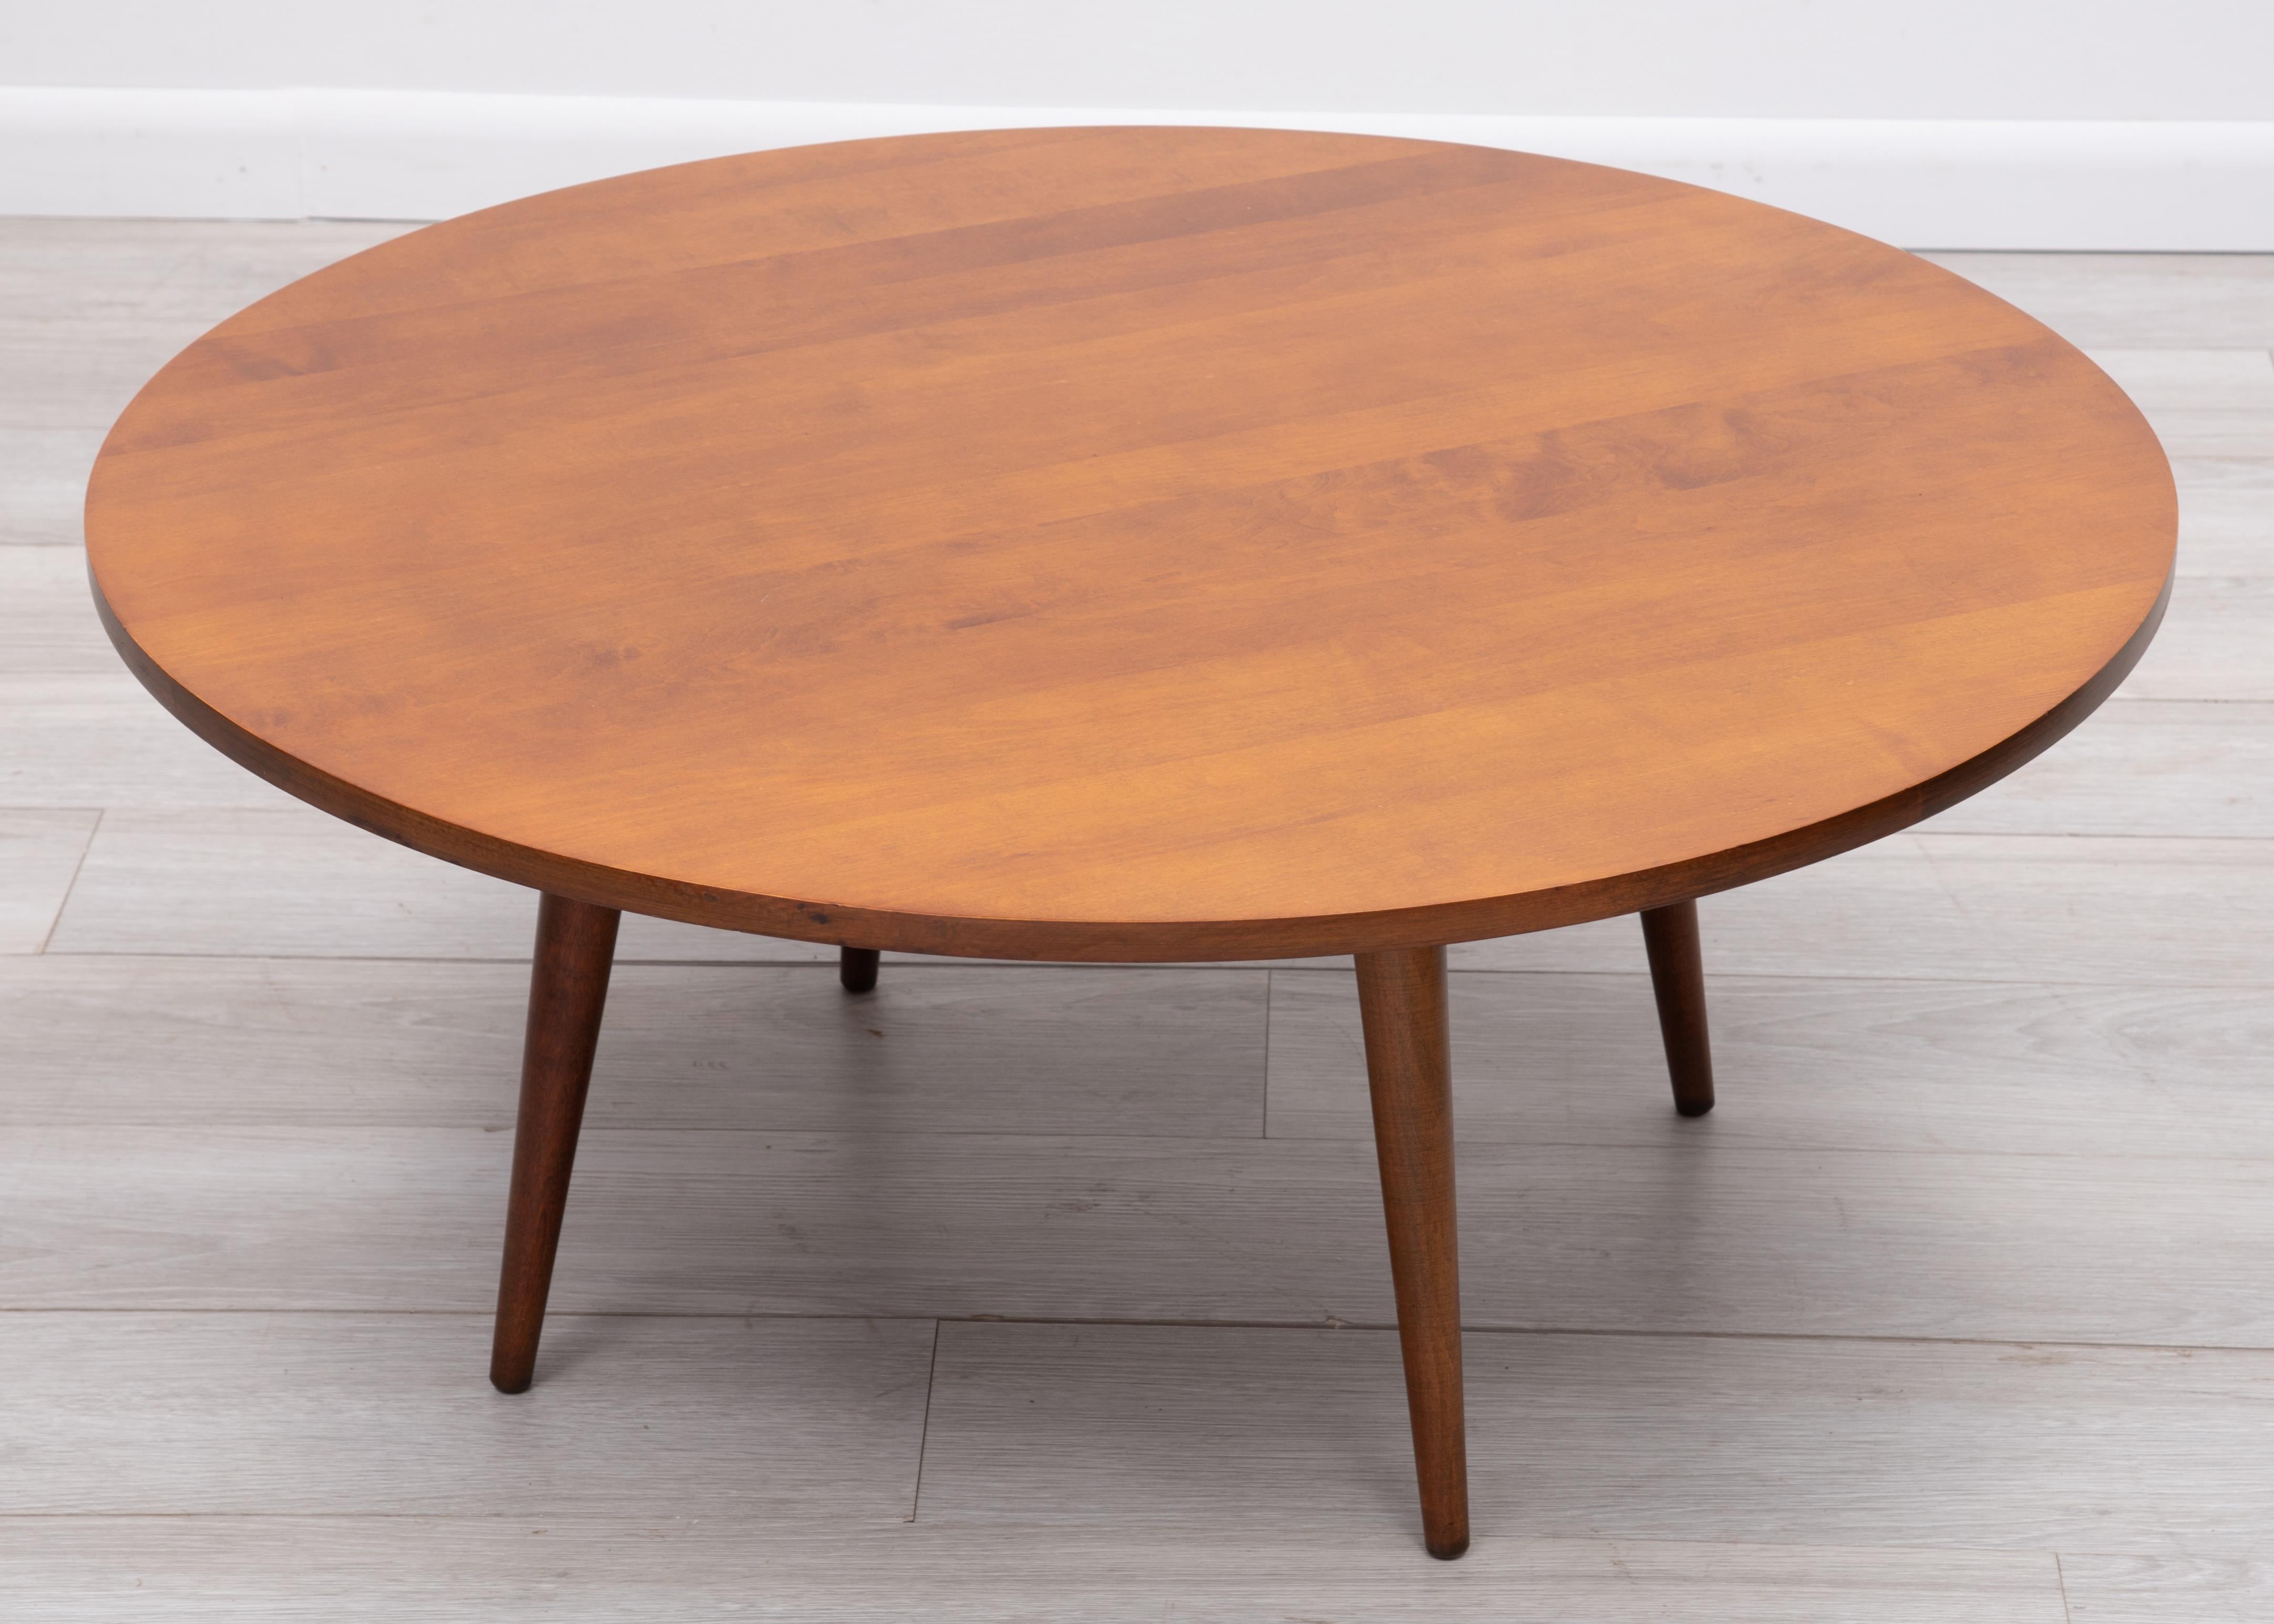 Round Paul McCobb Planner Group Coffee Table Winchendon Unmarked 1950s For Sale 2